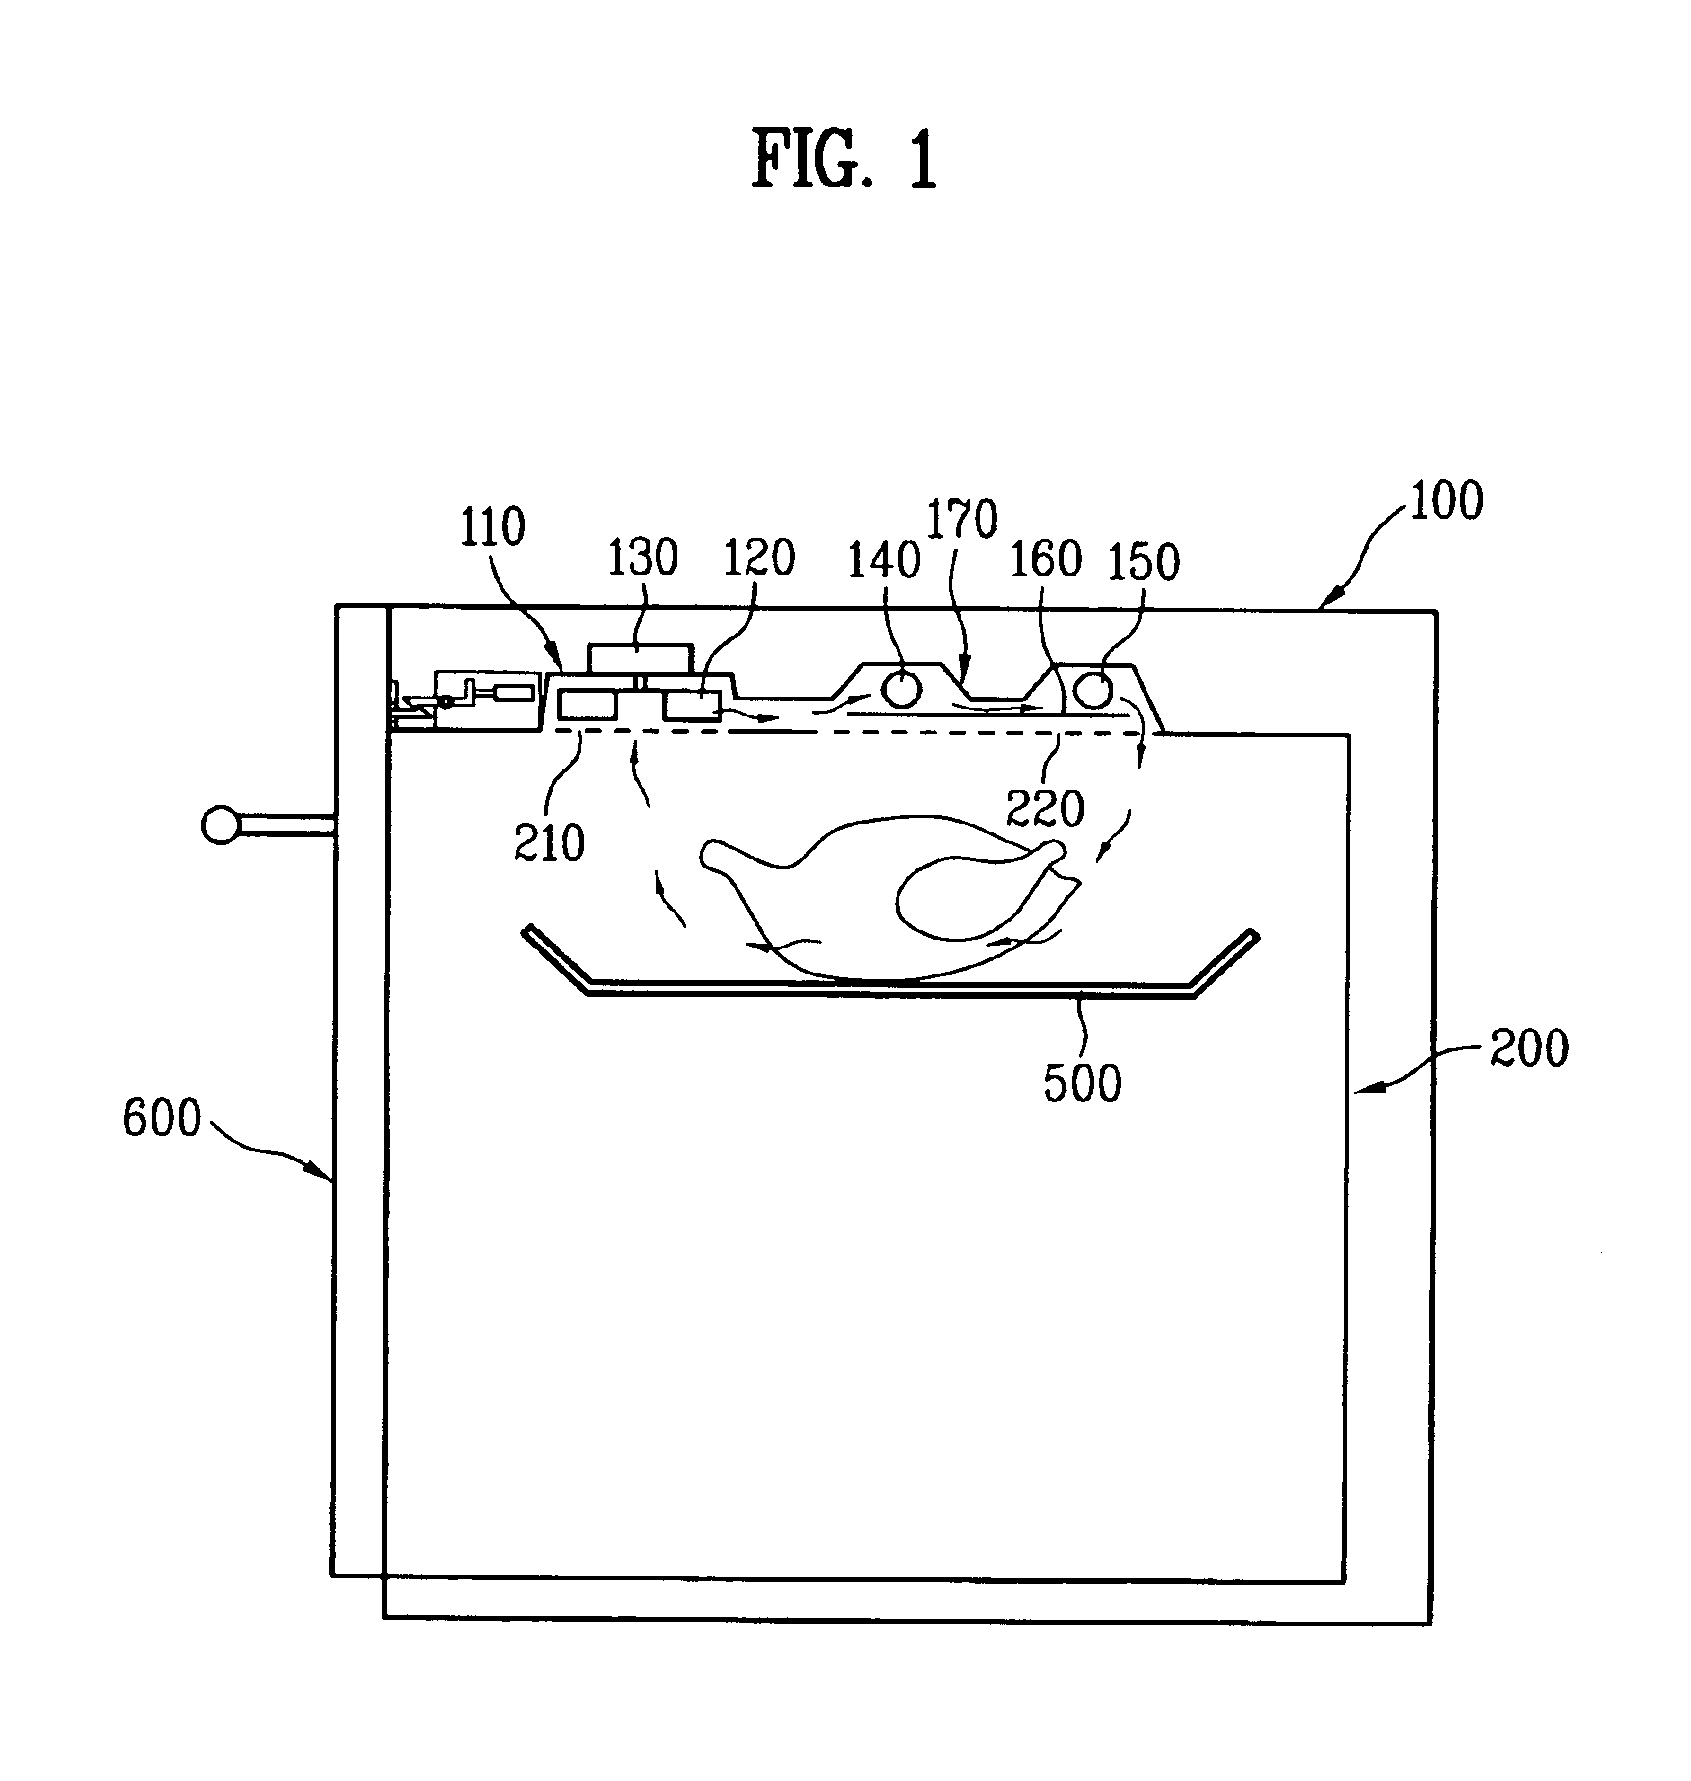 Safety device of electric oven